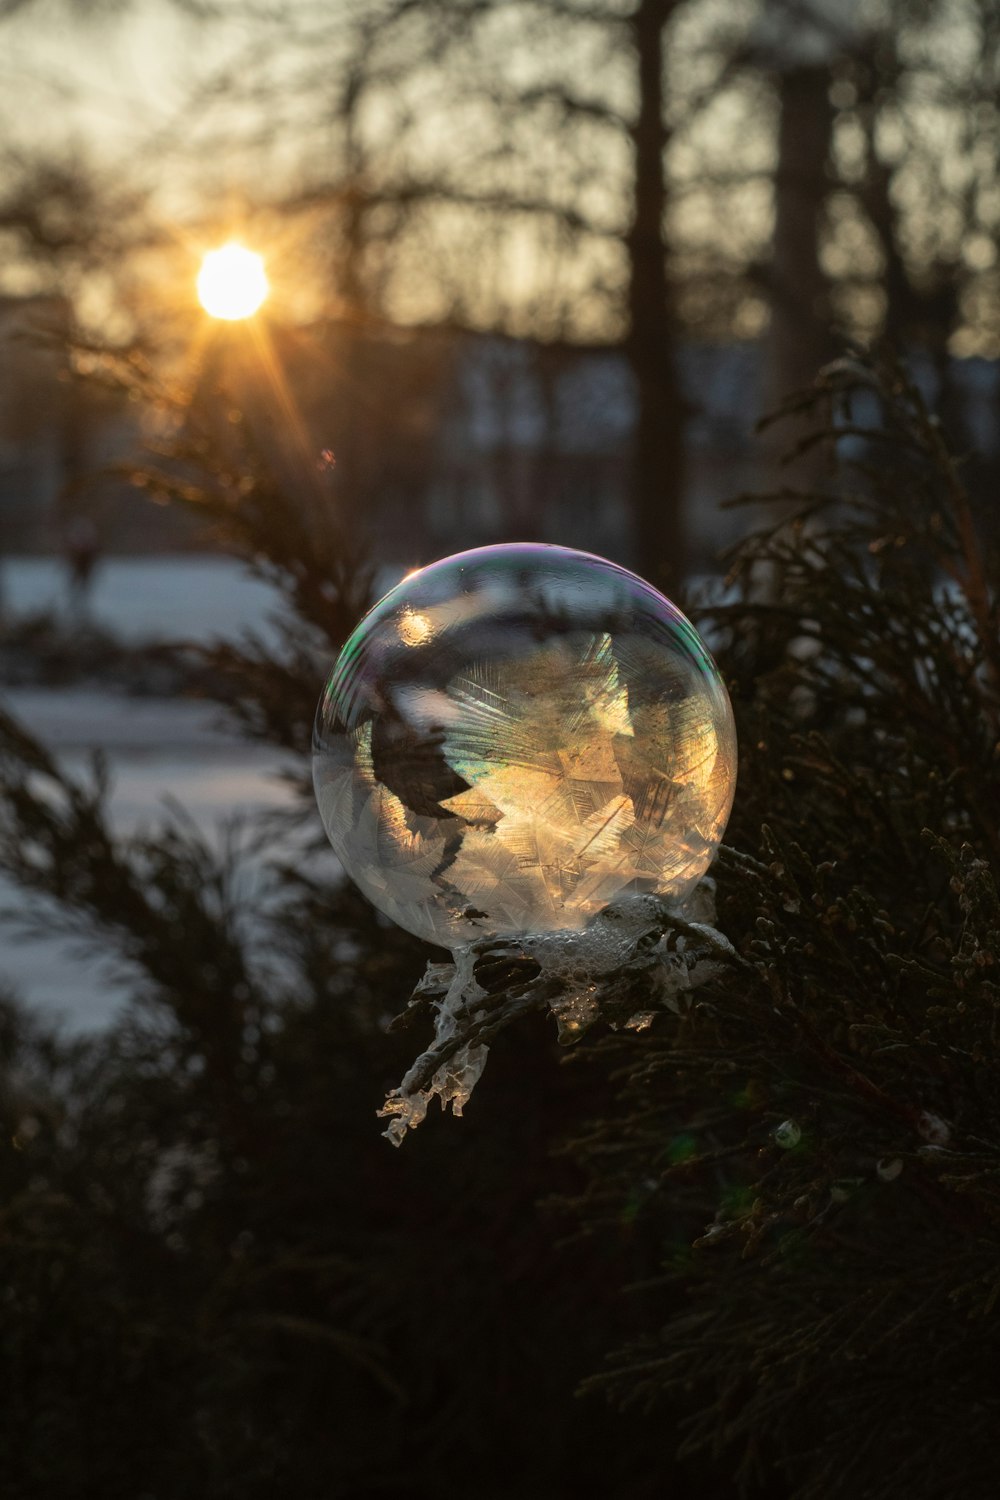 clear glass ball on green grass during sunset